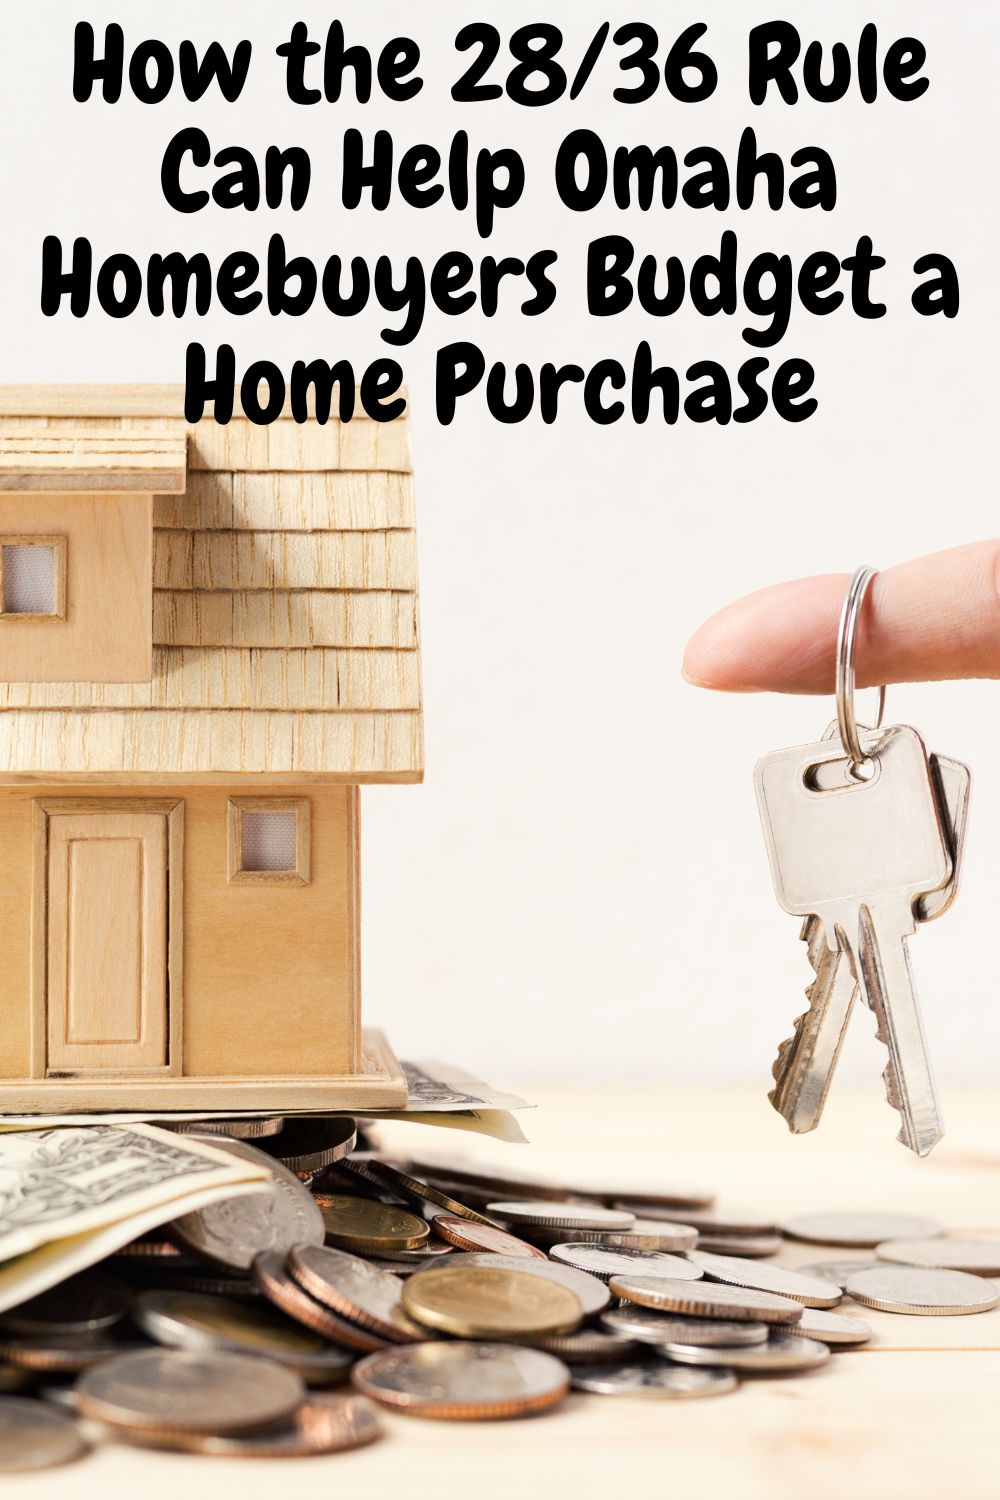 How the 28/36 Rule Can Help Omaha Homebuyers Budget a Home Purchase